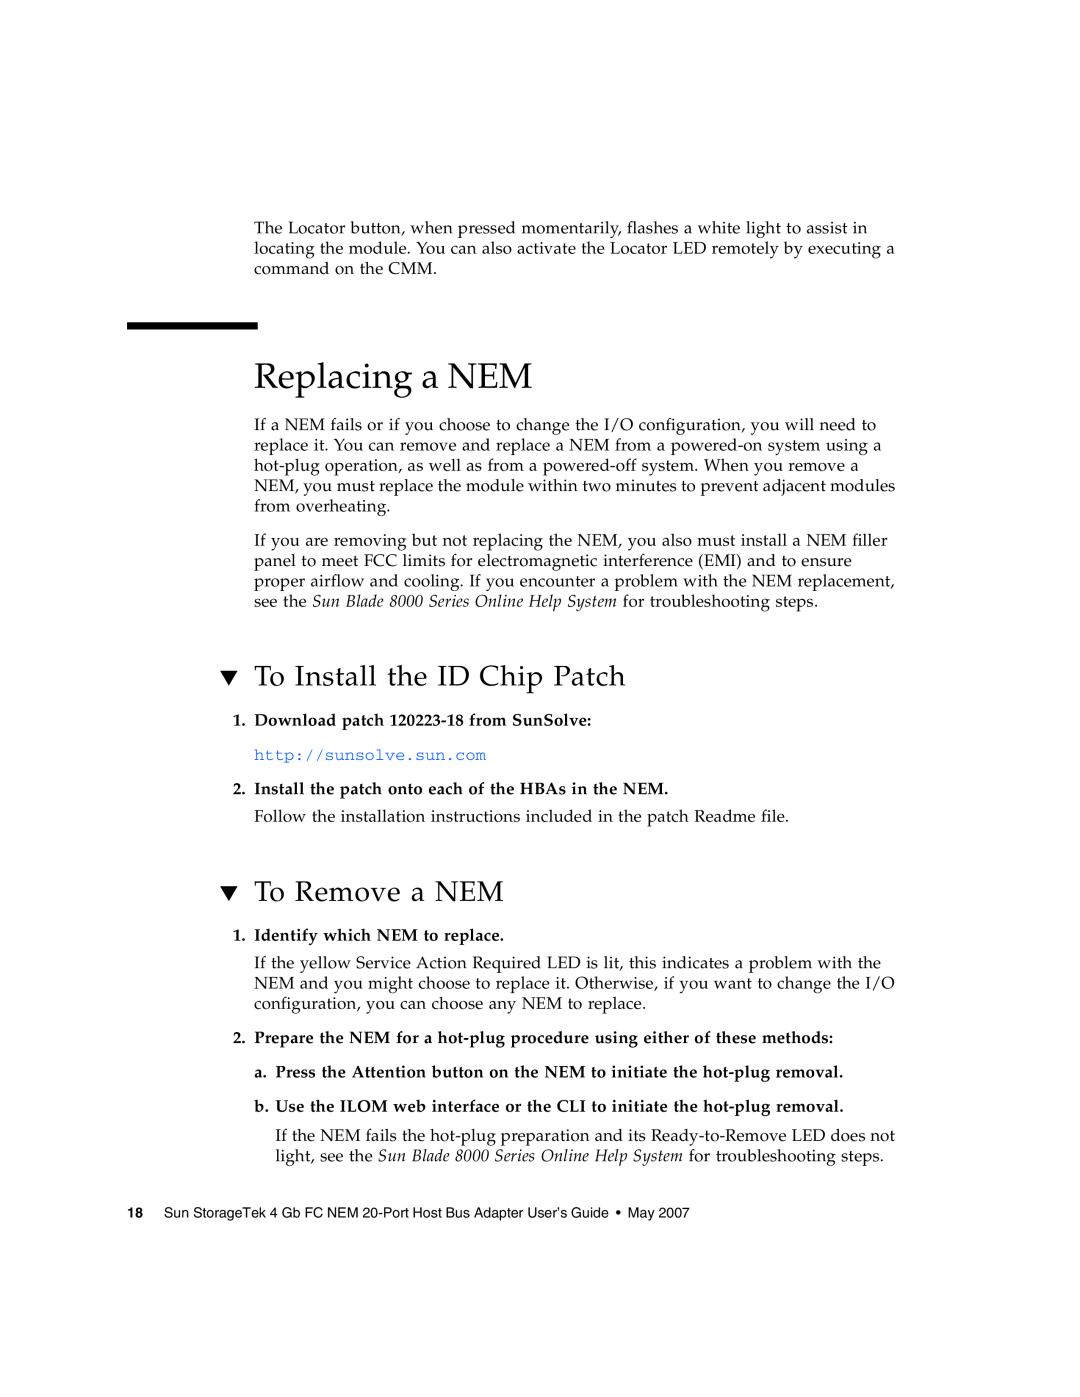 Sun Microsystems 2.0 manual Replacing a NEM, To Install the ID Chip Patch, To Remove a NEM 